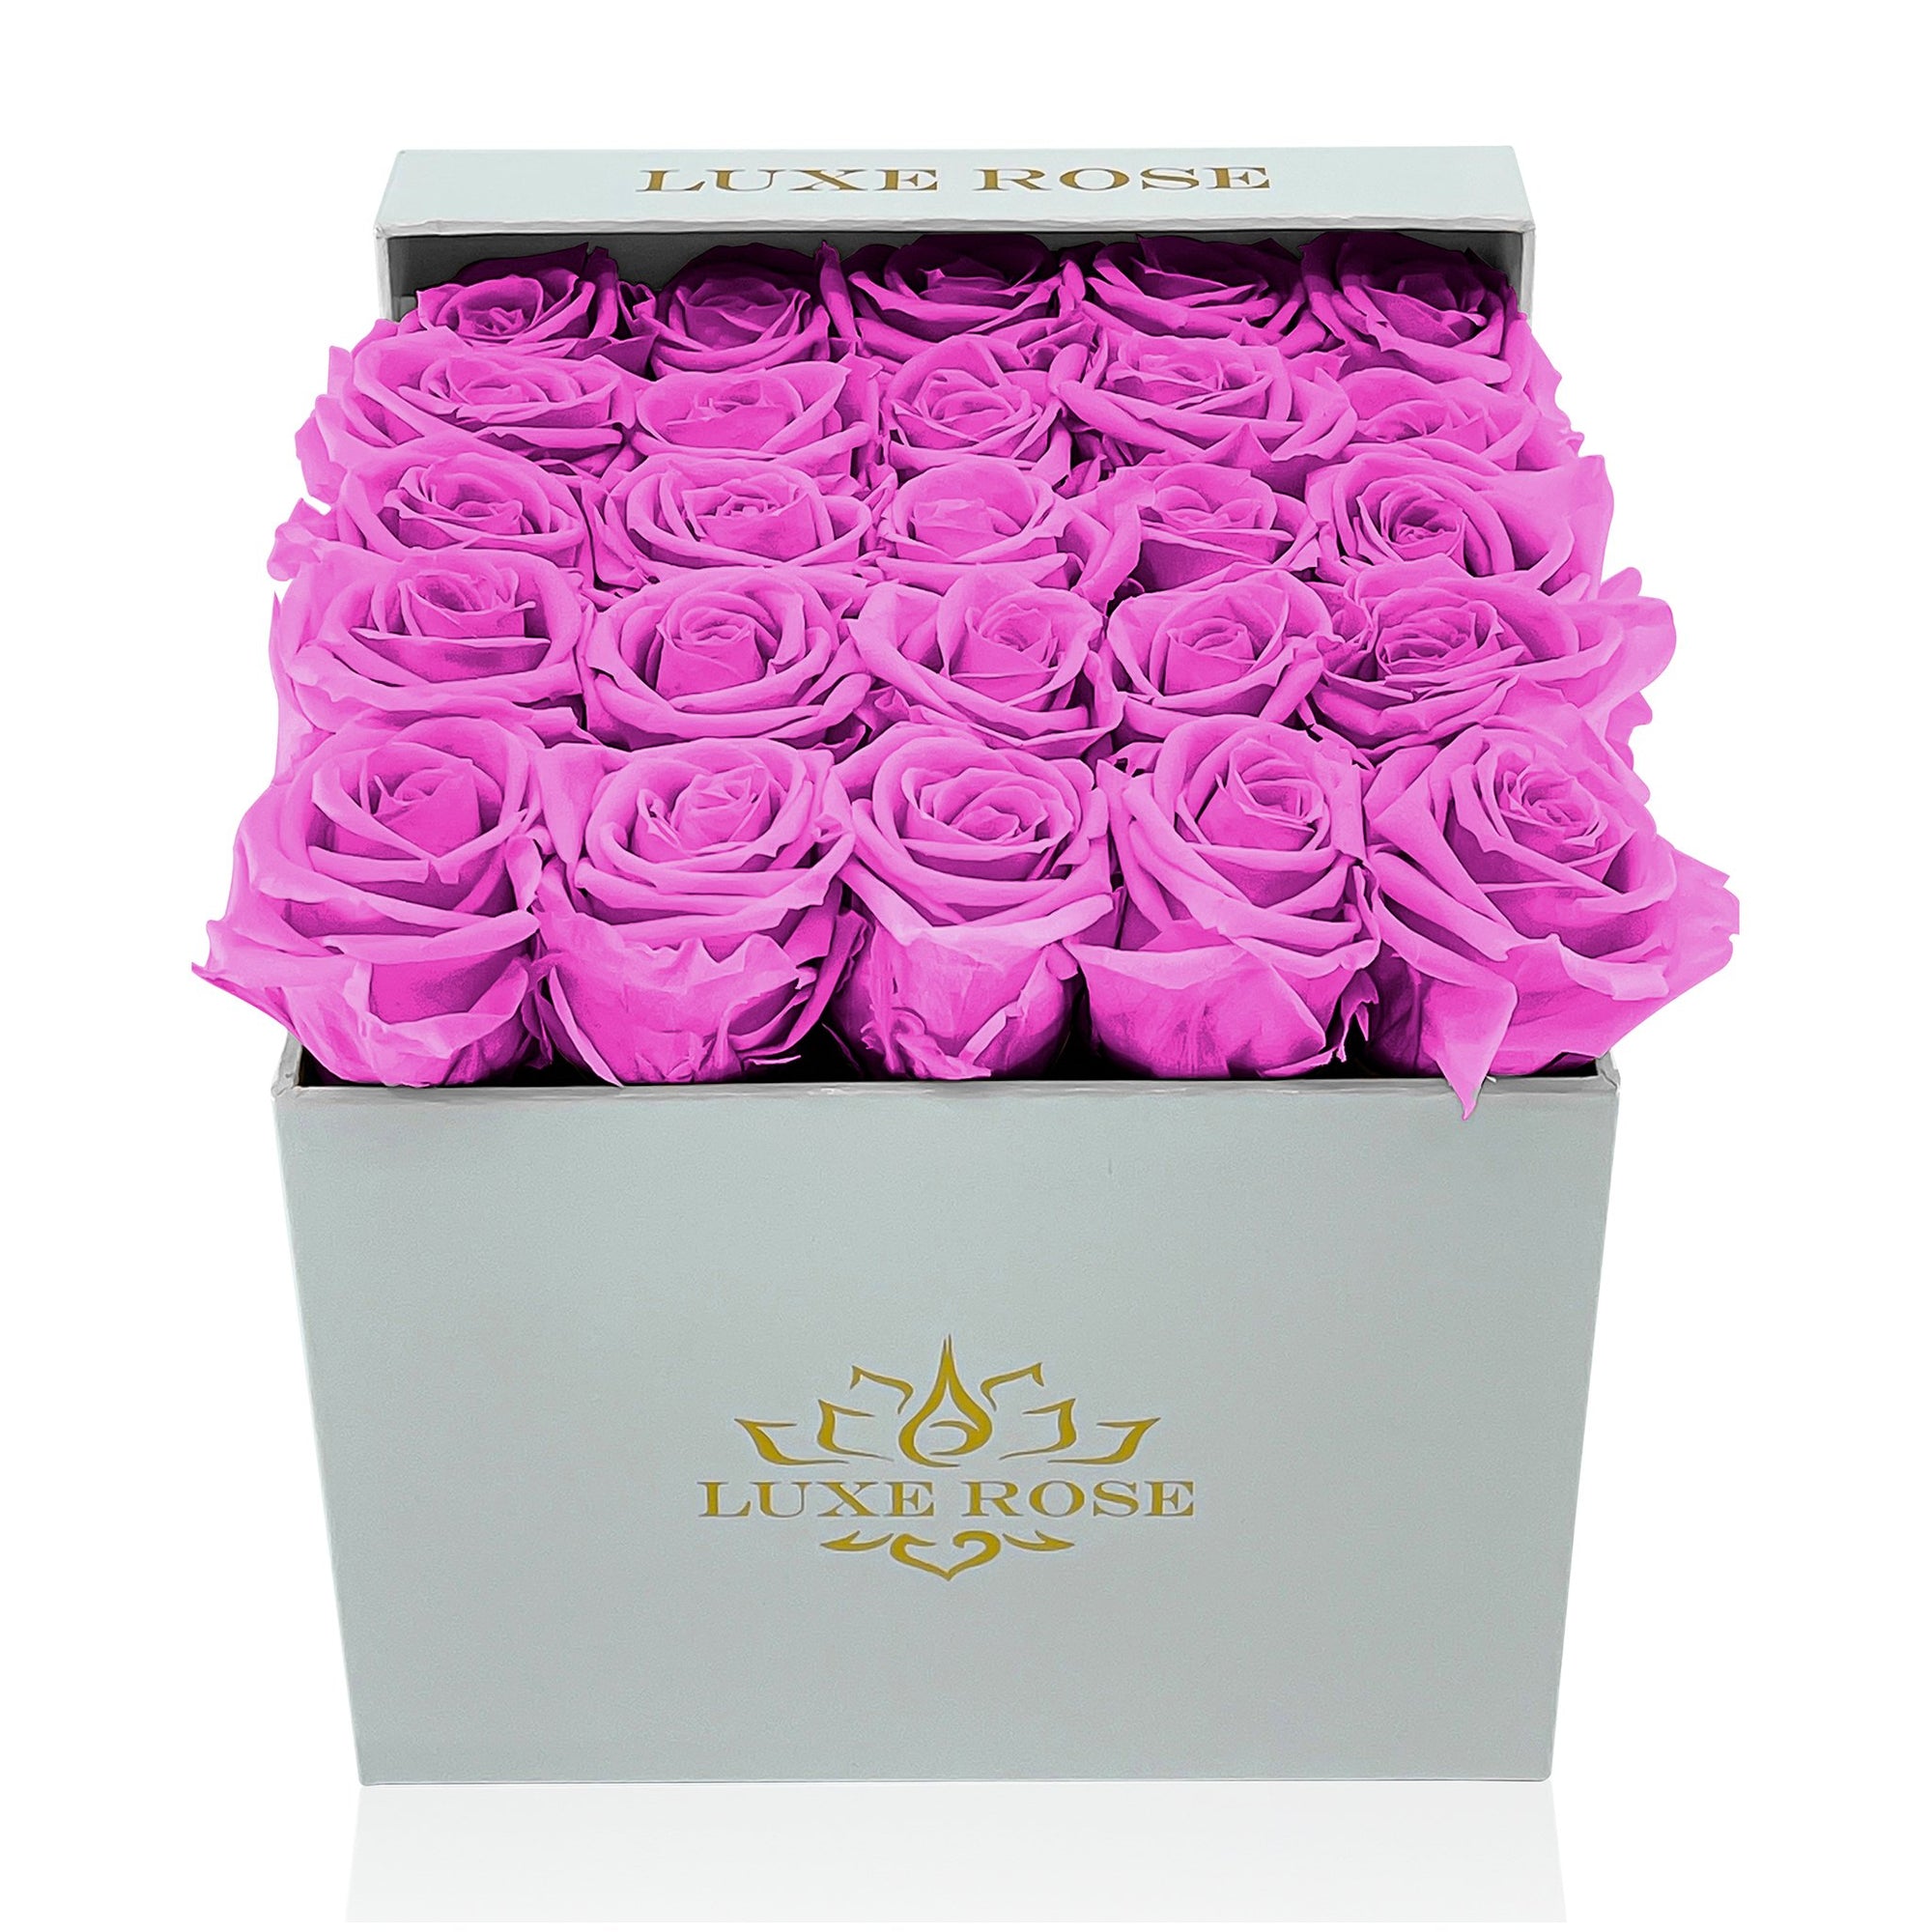 Shop Preserved Rose Collection at Manhattan Flower Delivery